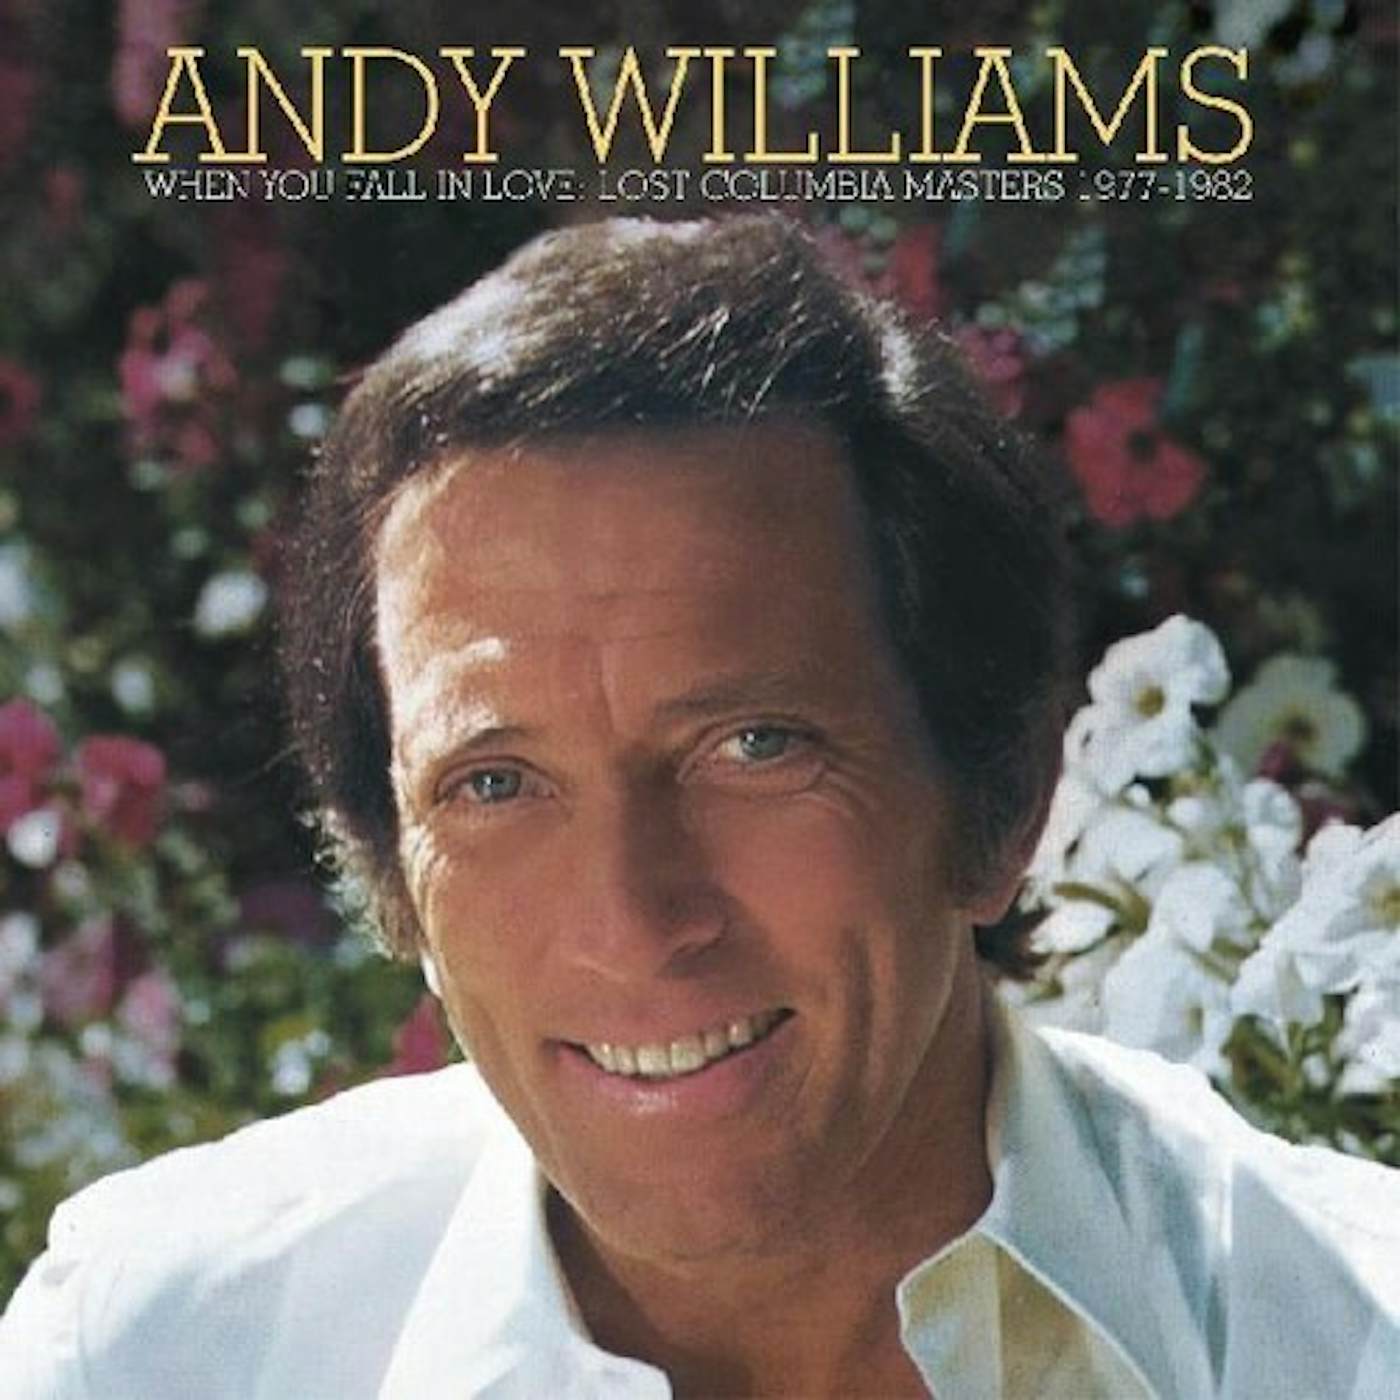 Andy Williams WHEN YOU FALL IN LOVE - LOST COLUMBIA MASTERS CD